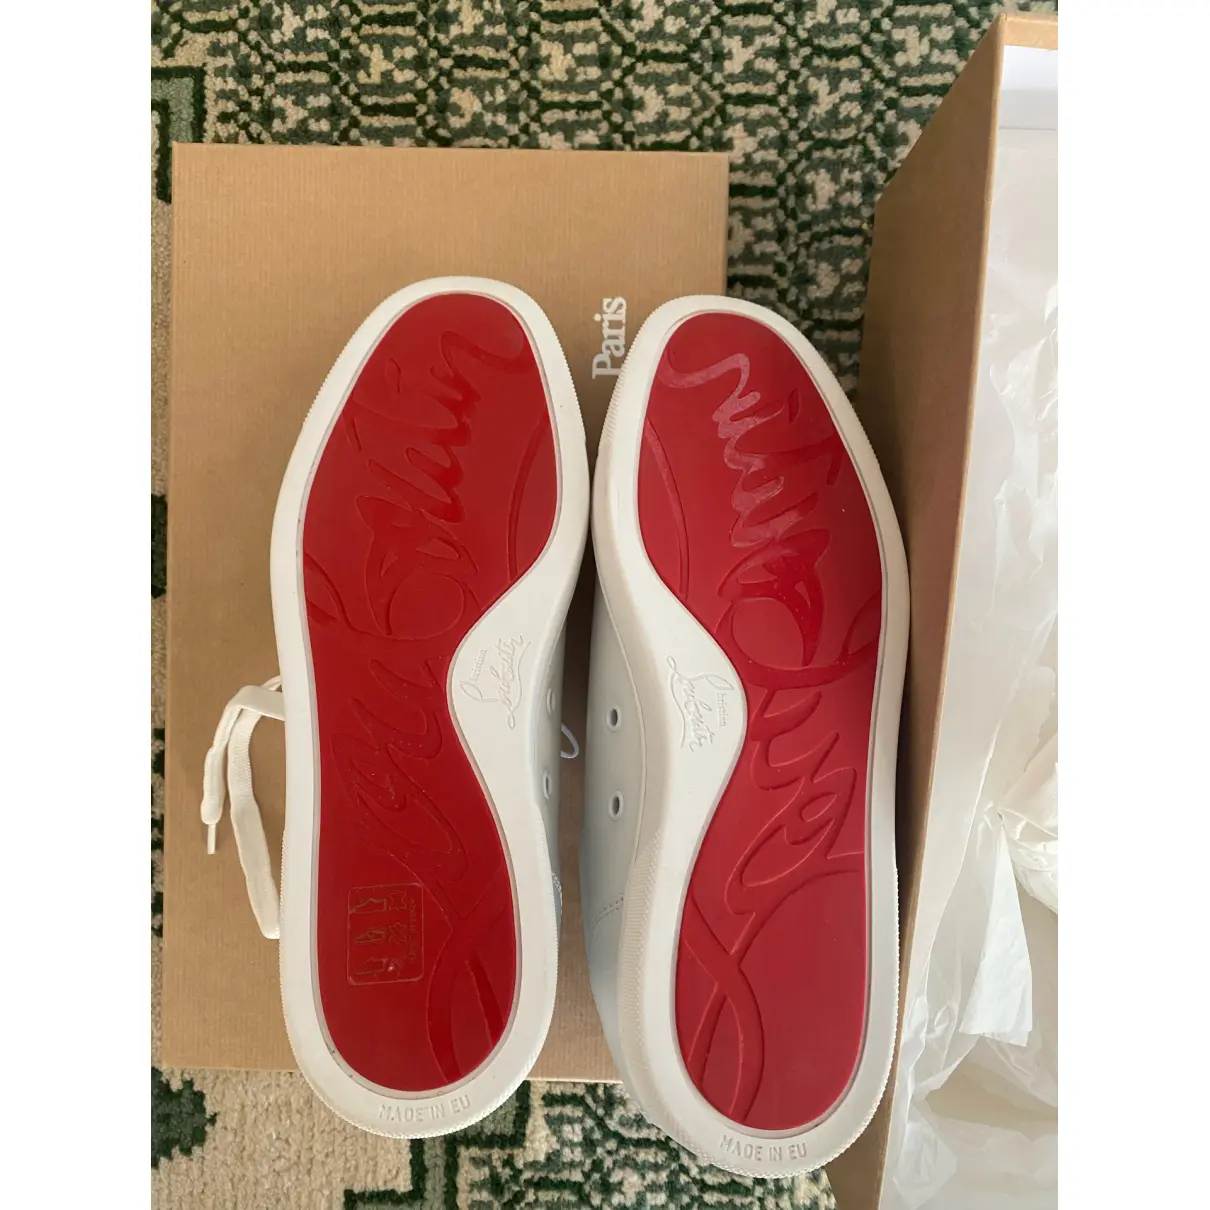 Buy Christian Louboutin Louis leather low trainers online